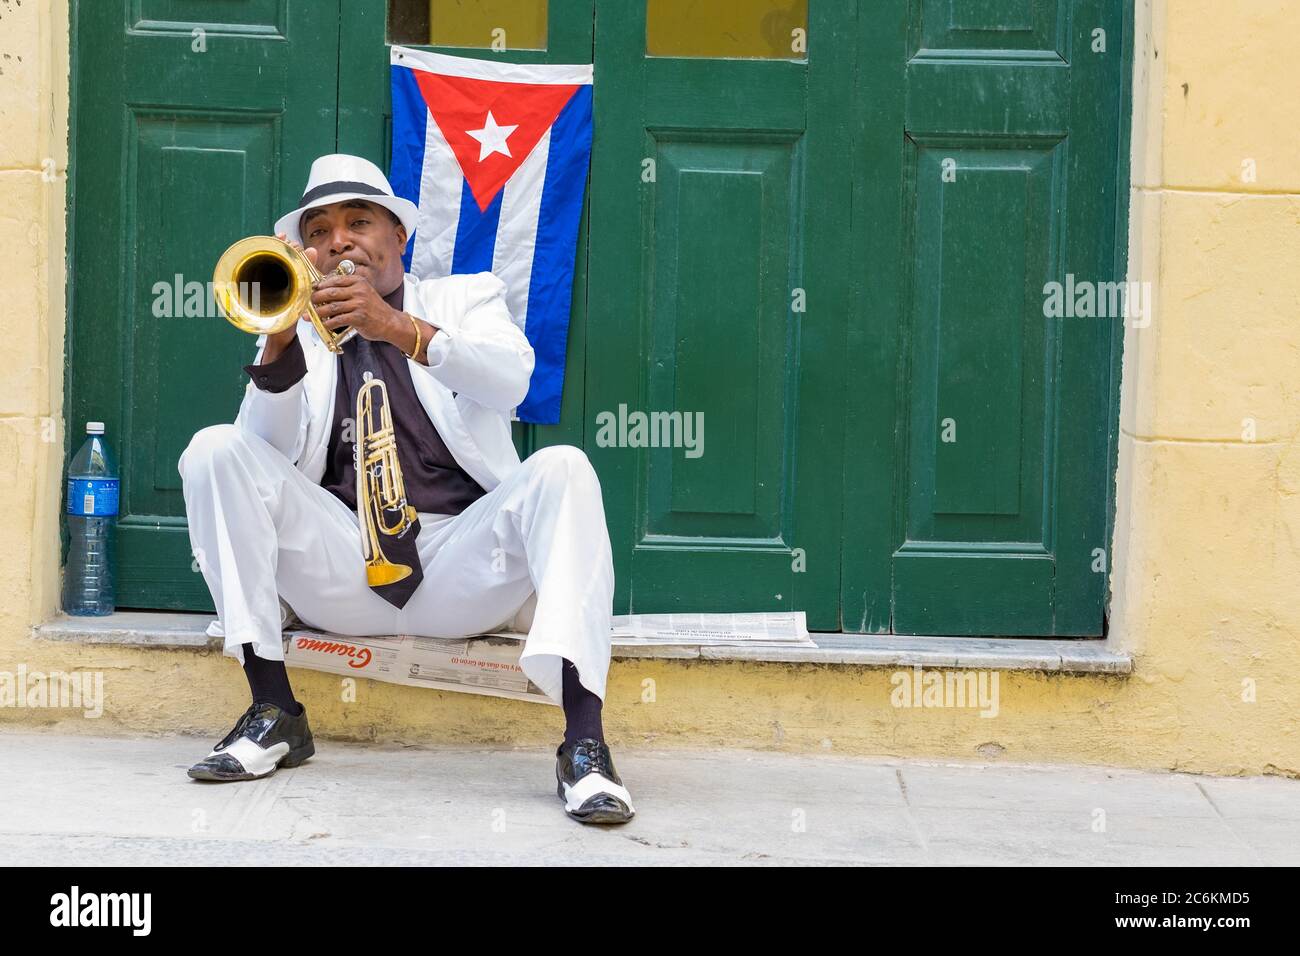 Cuban musician playing the trumpet next to a cuban flag in Havana Stock Photo